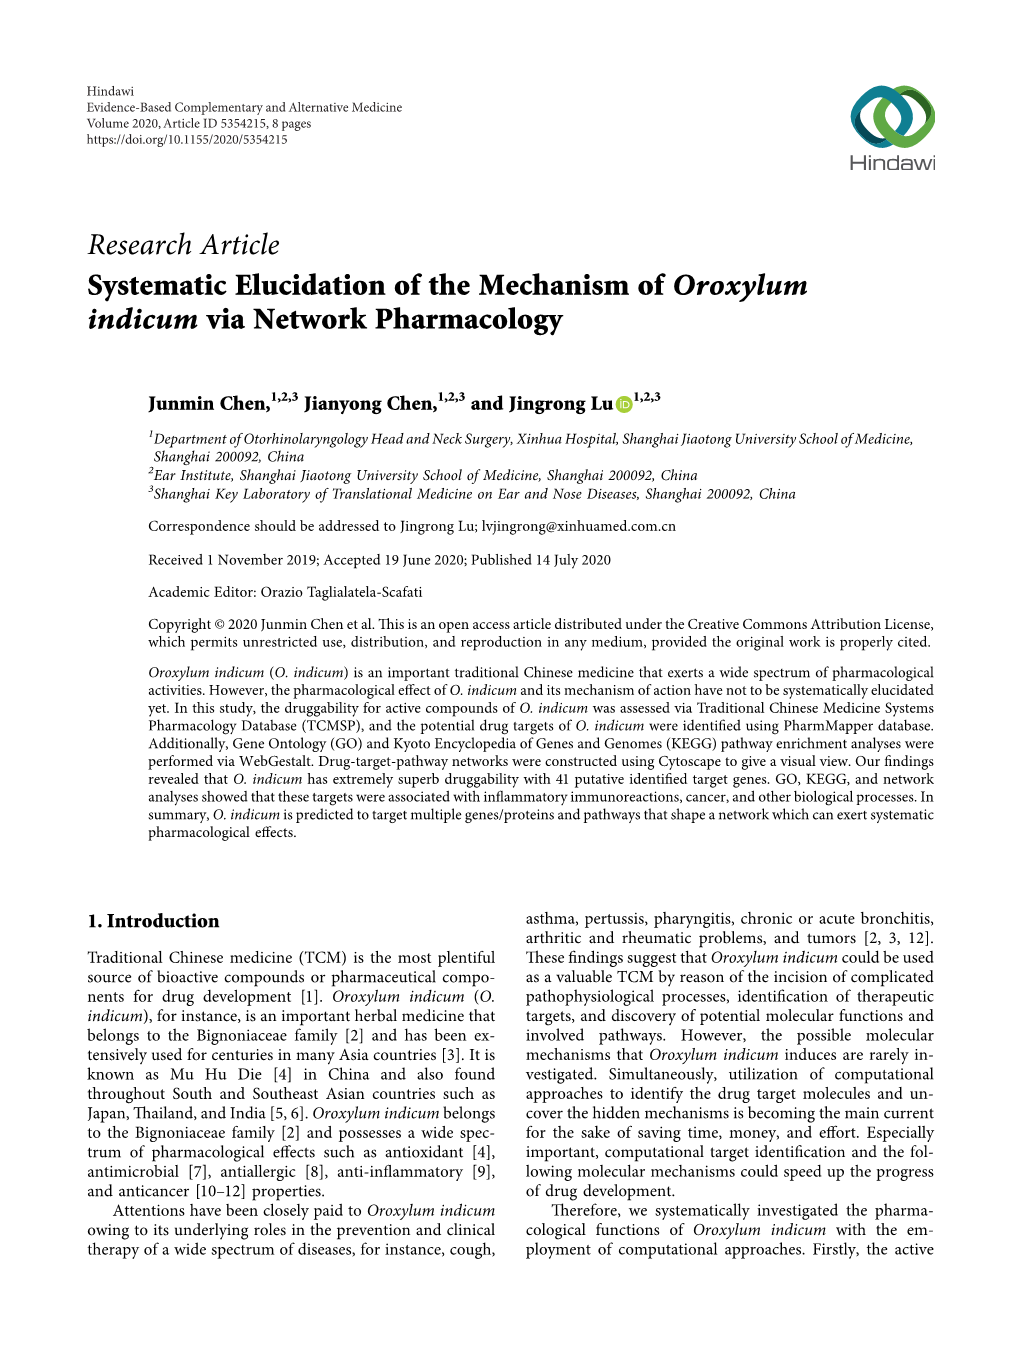 Systematic Elucidation of the Mechanism of Oroxylum Indicum Via Network Pharmacology